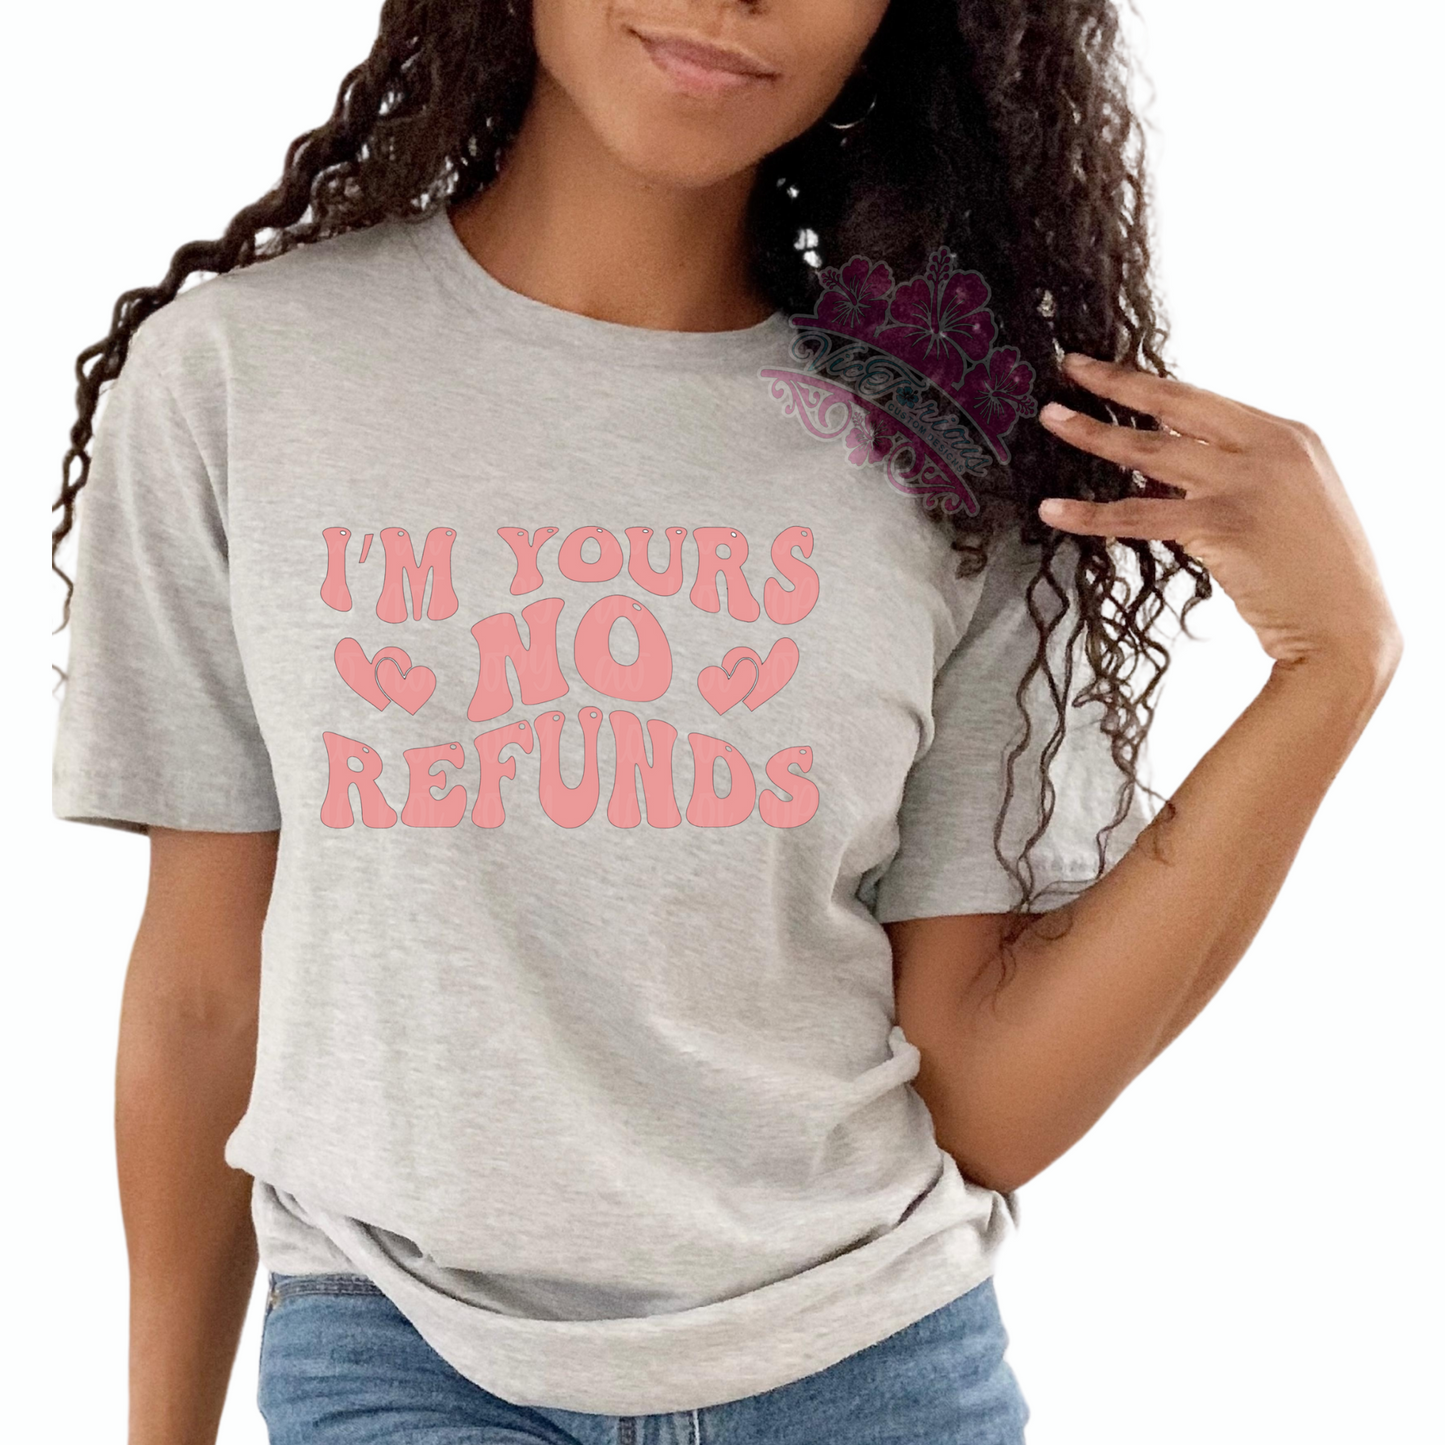 I'm Yours No Refunds Screen Print-SHIRT NOT INCLUDED